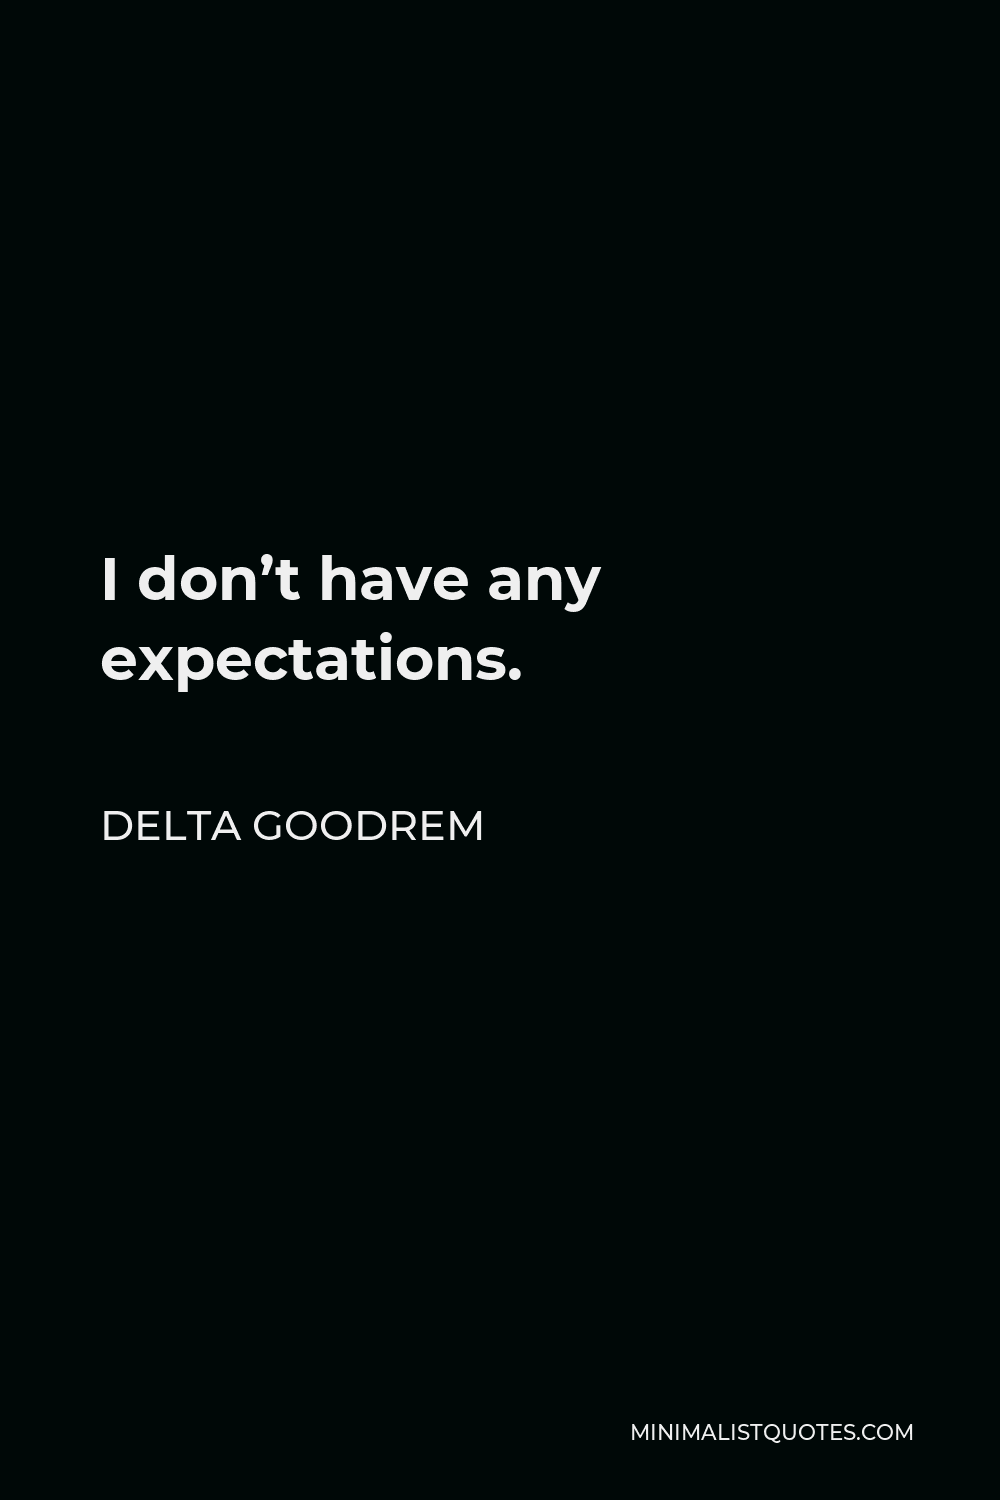 Delta Goodrem Quote: I don't have any expectations.